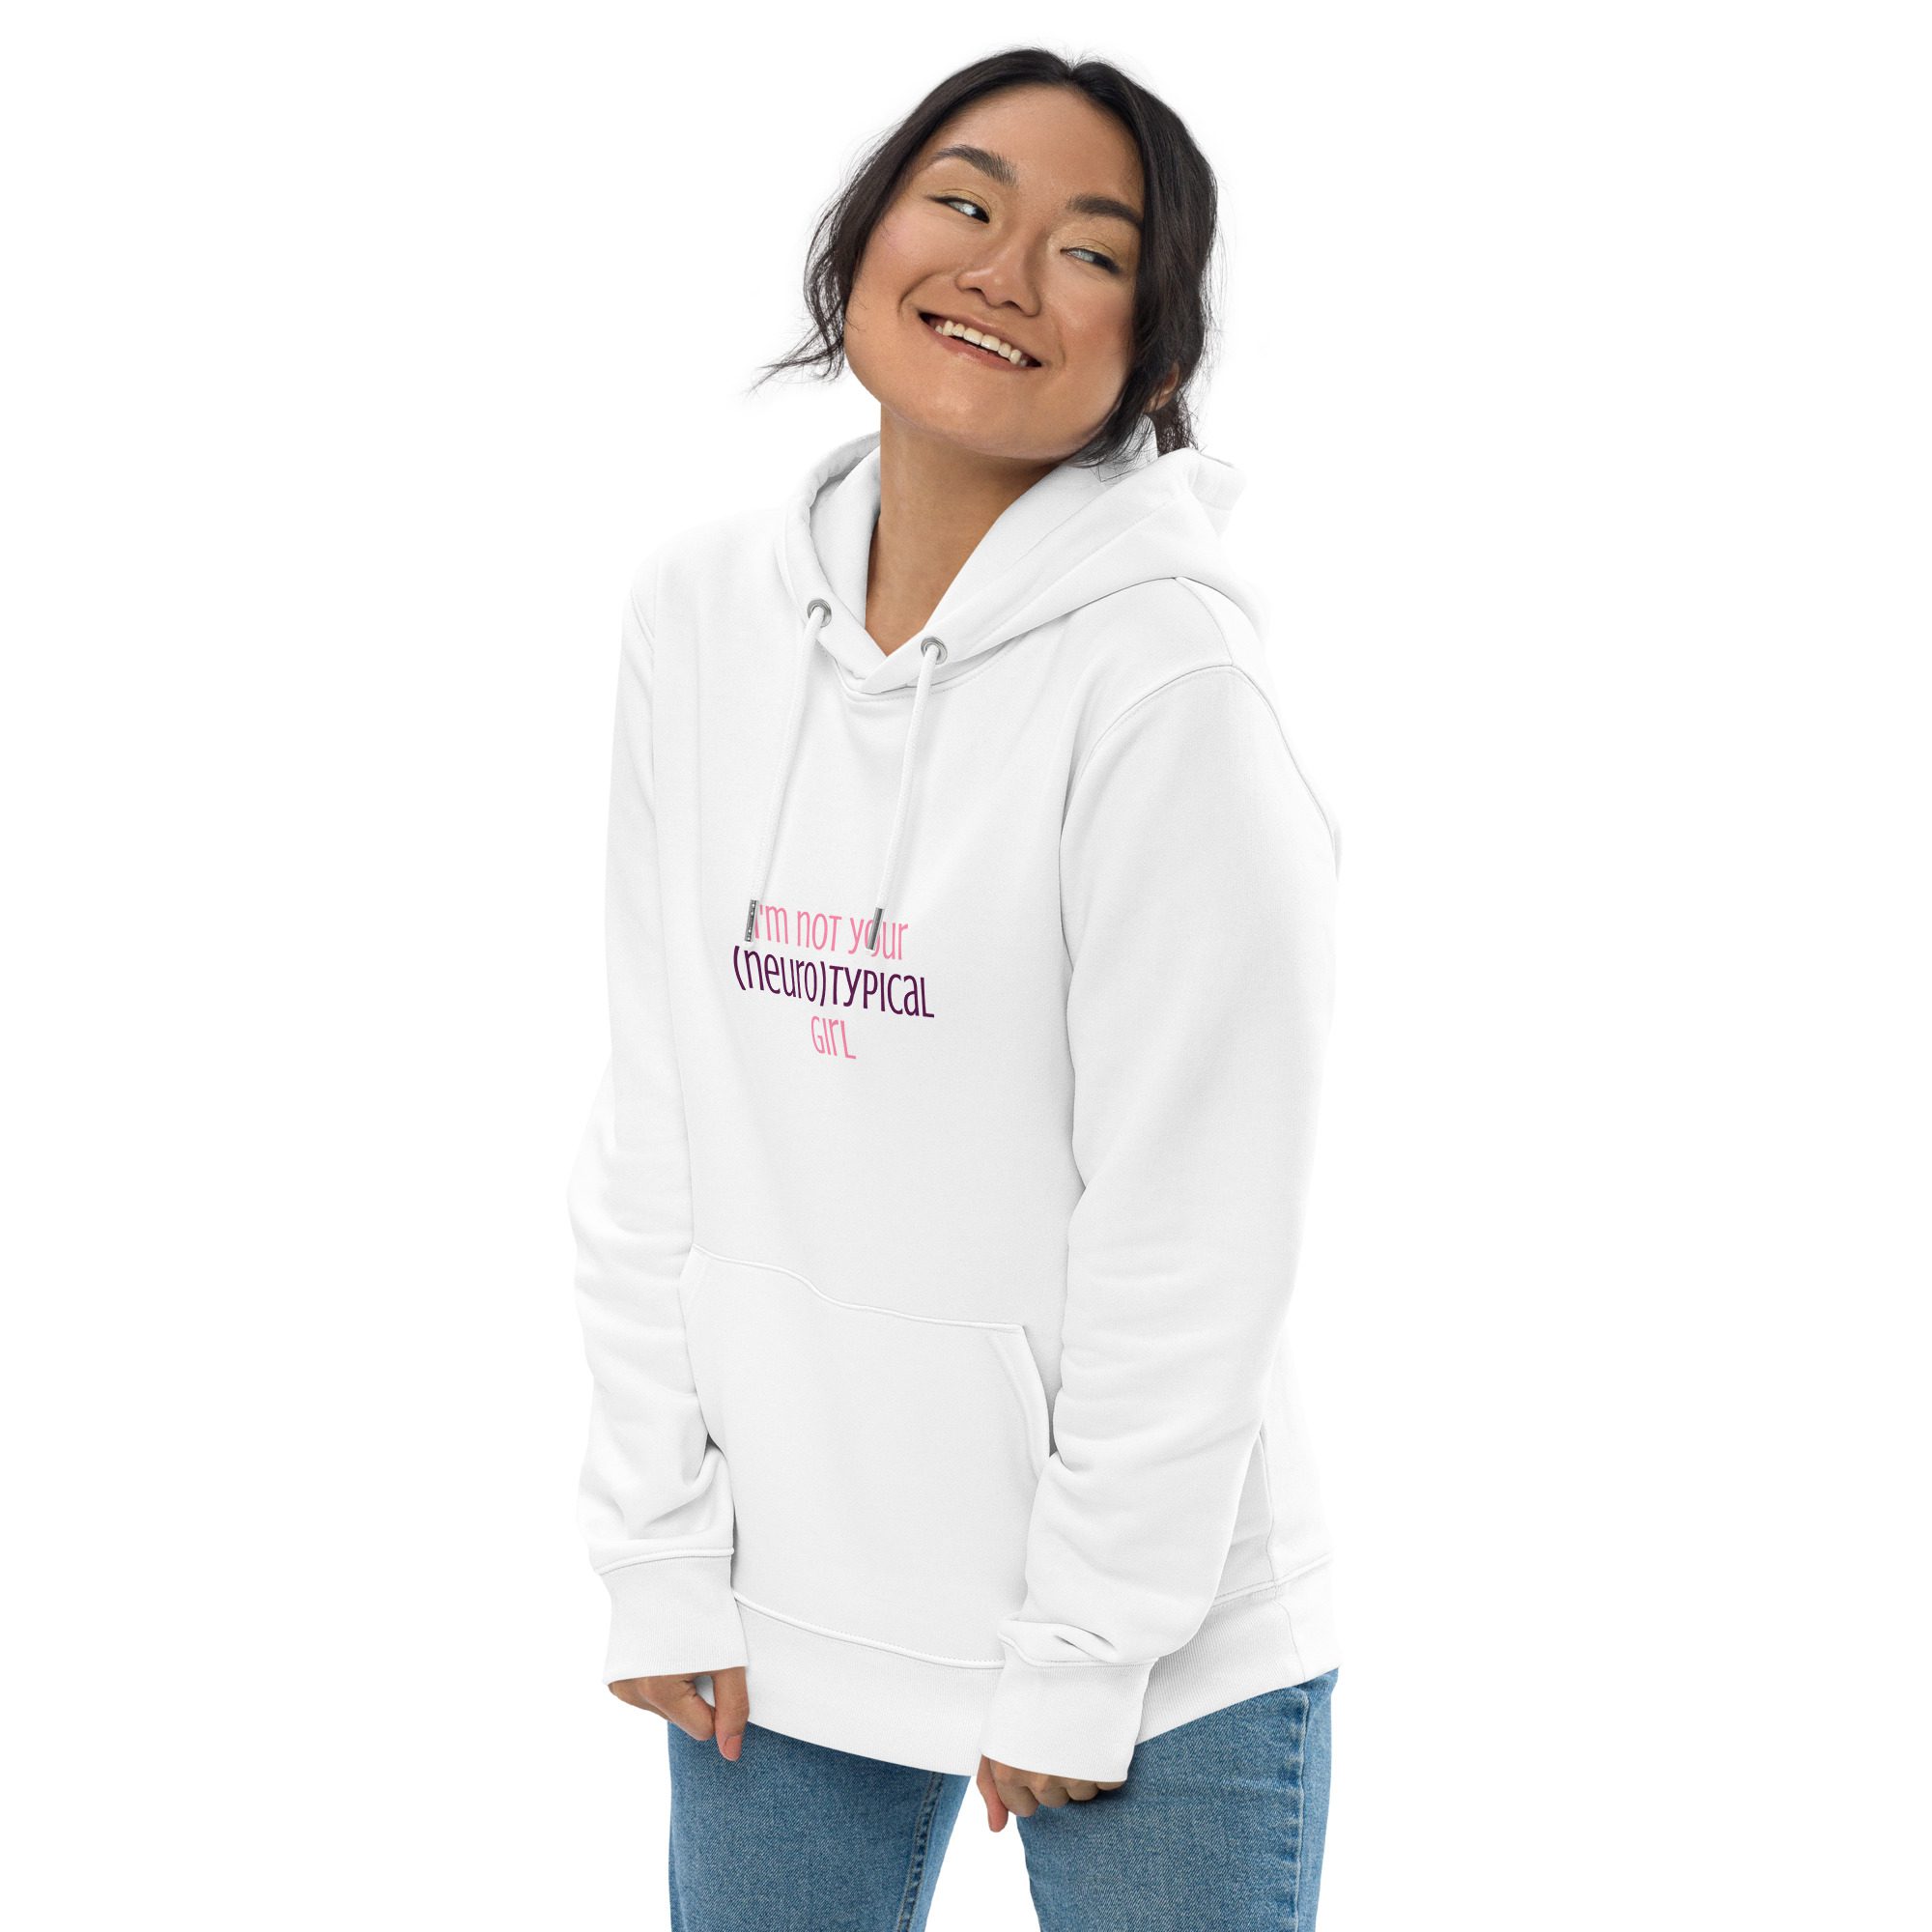 I’m Not Your Neurotypical Girl Eco Hoodie